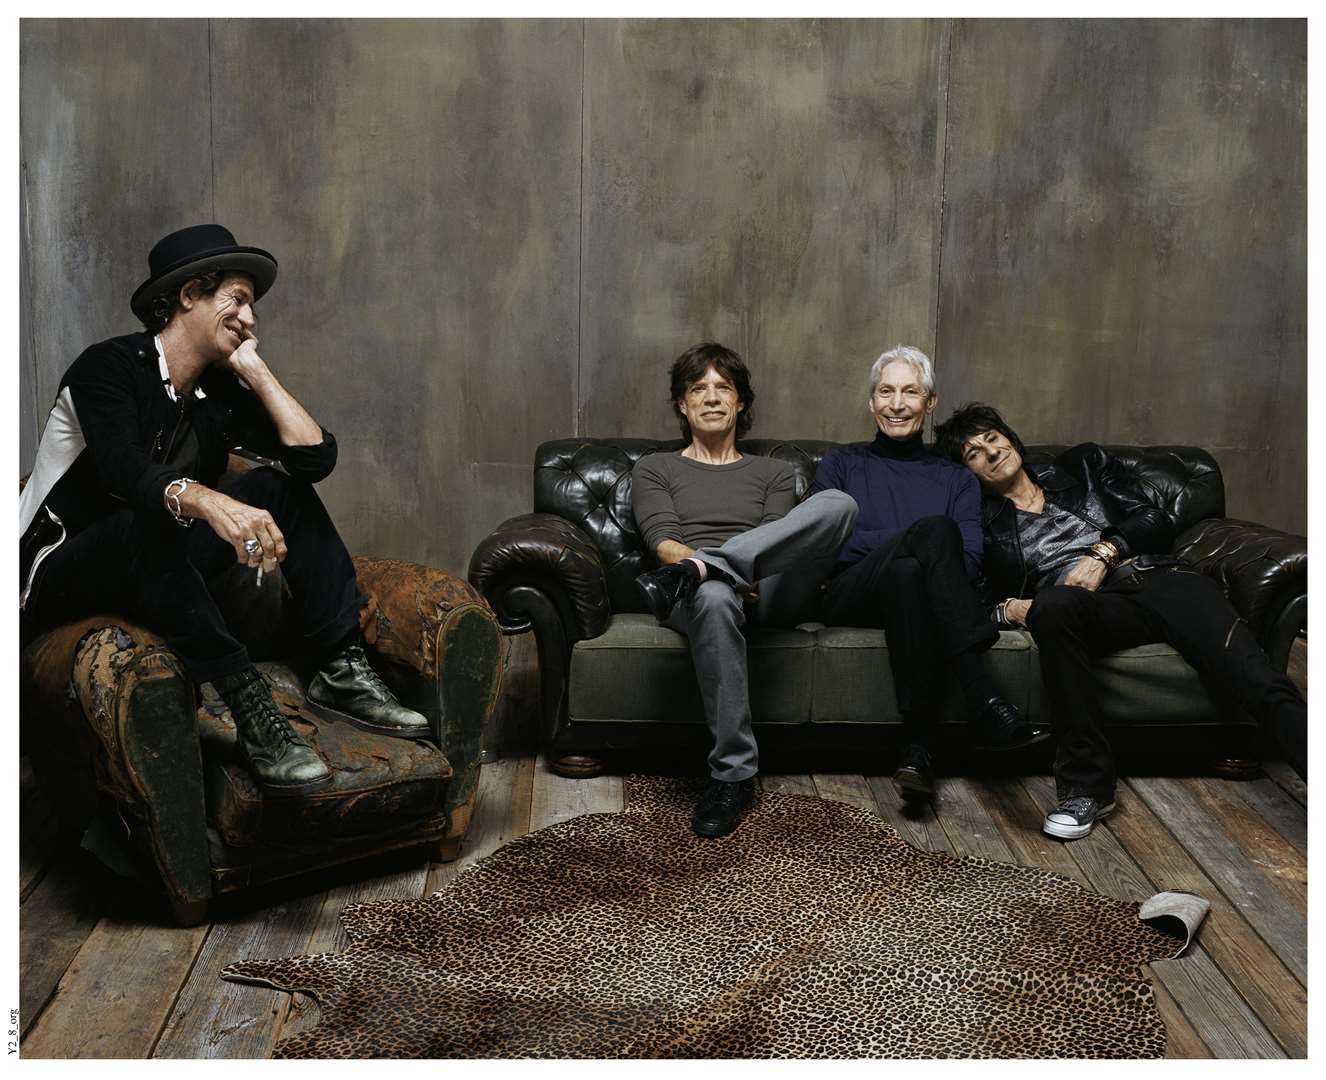 The cover of The Rolling Stones 50 by Mick Jagger, Keith Richards, Charlie Watts and Ronnie Wood.